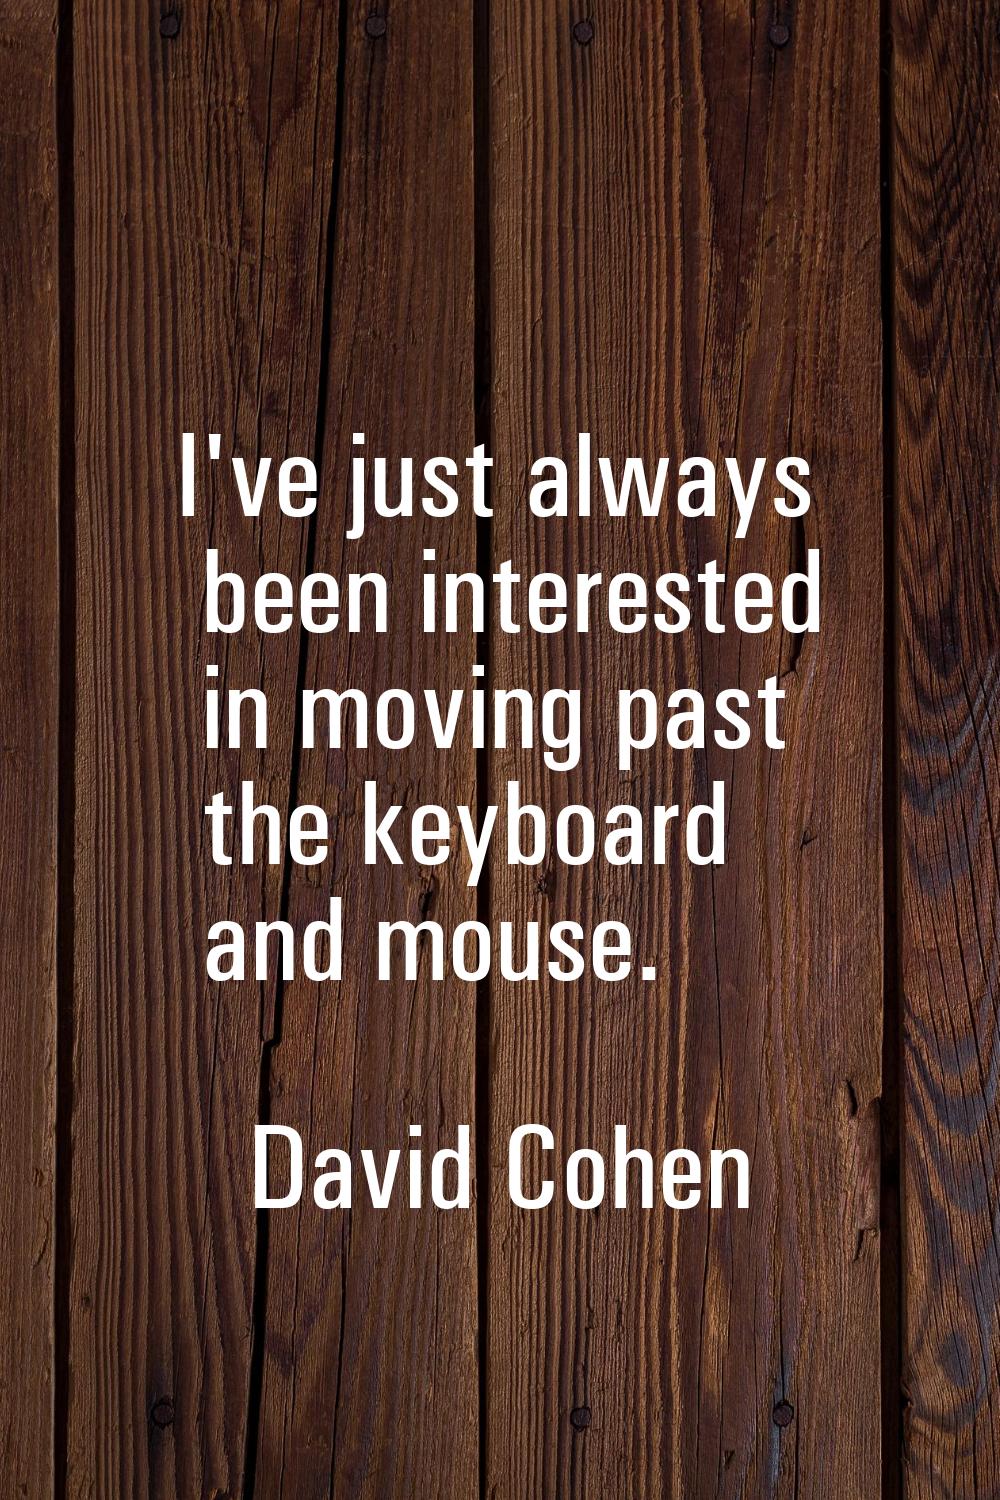 I've just always been interested in moving past the keyboard and mouse.